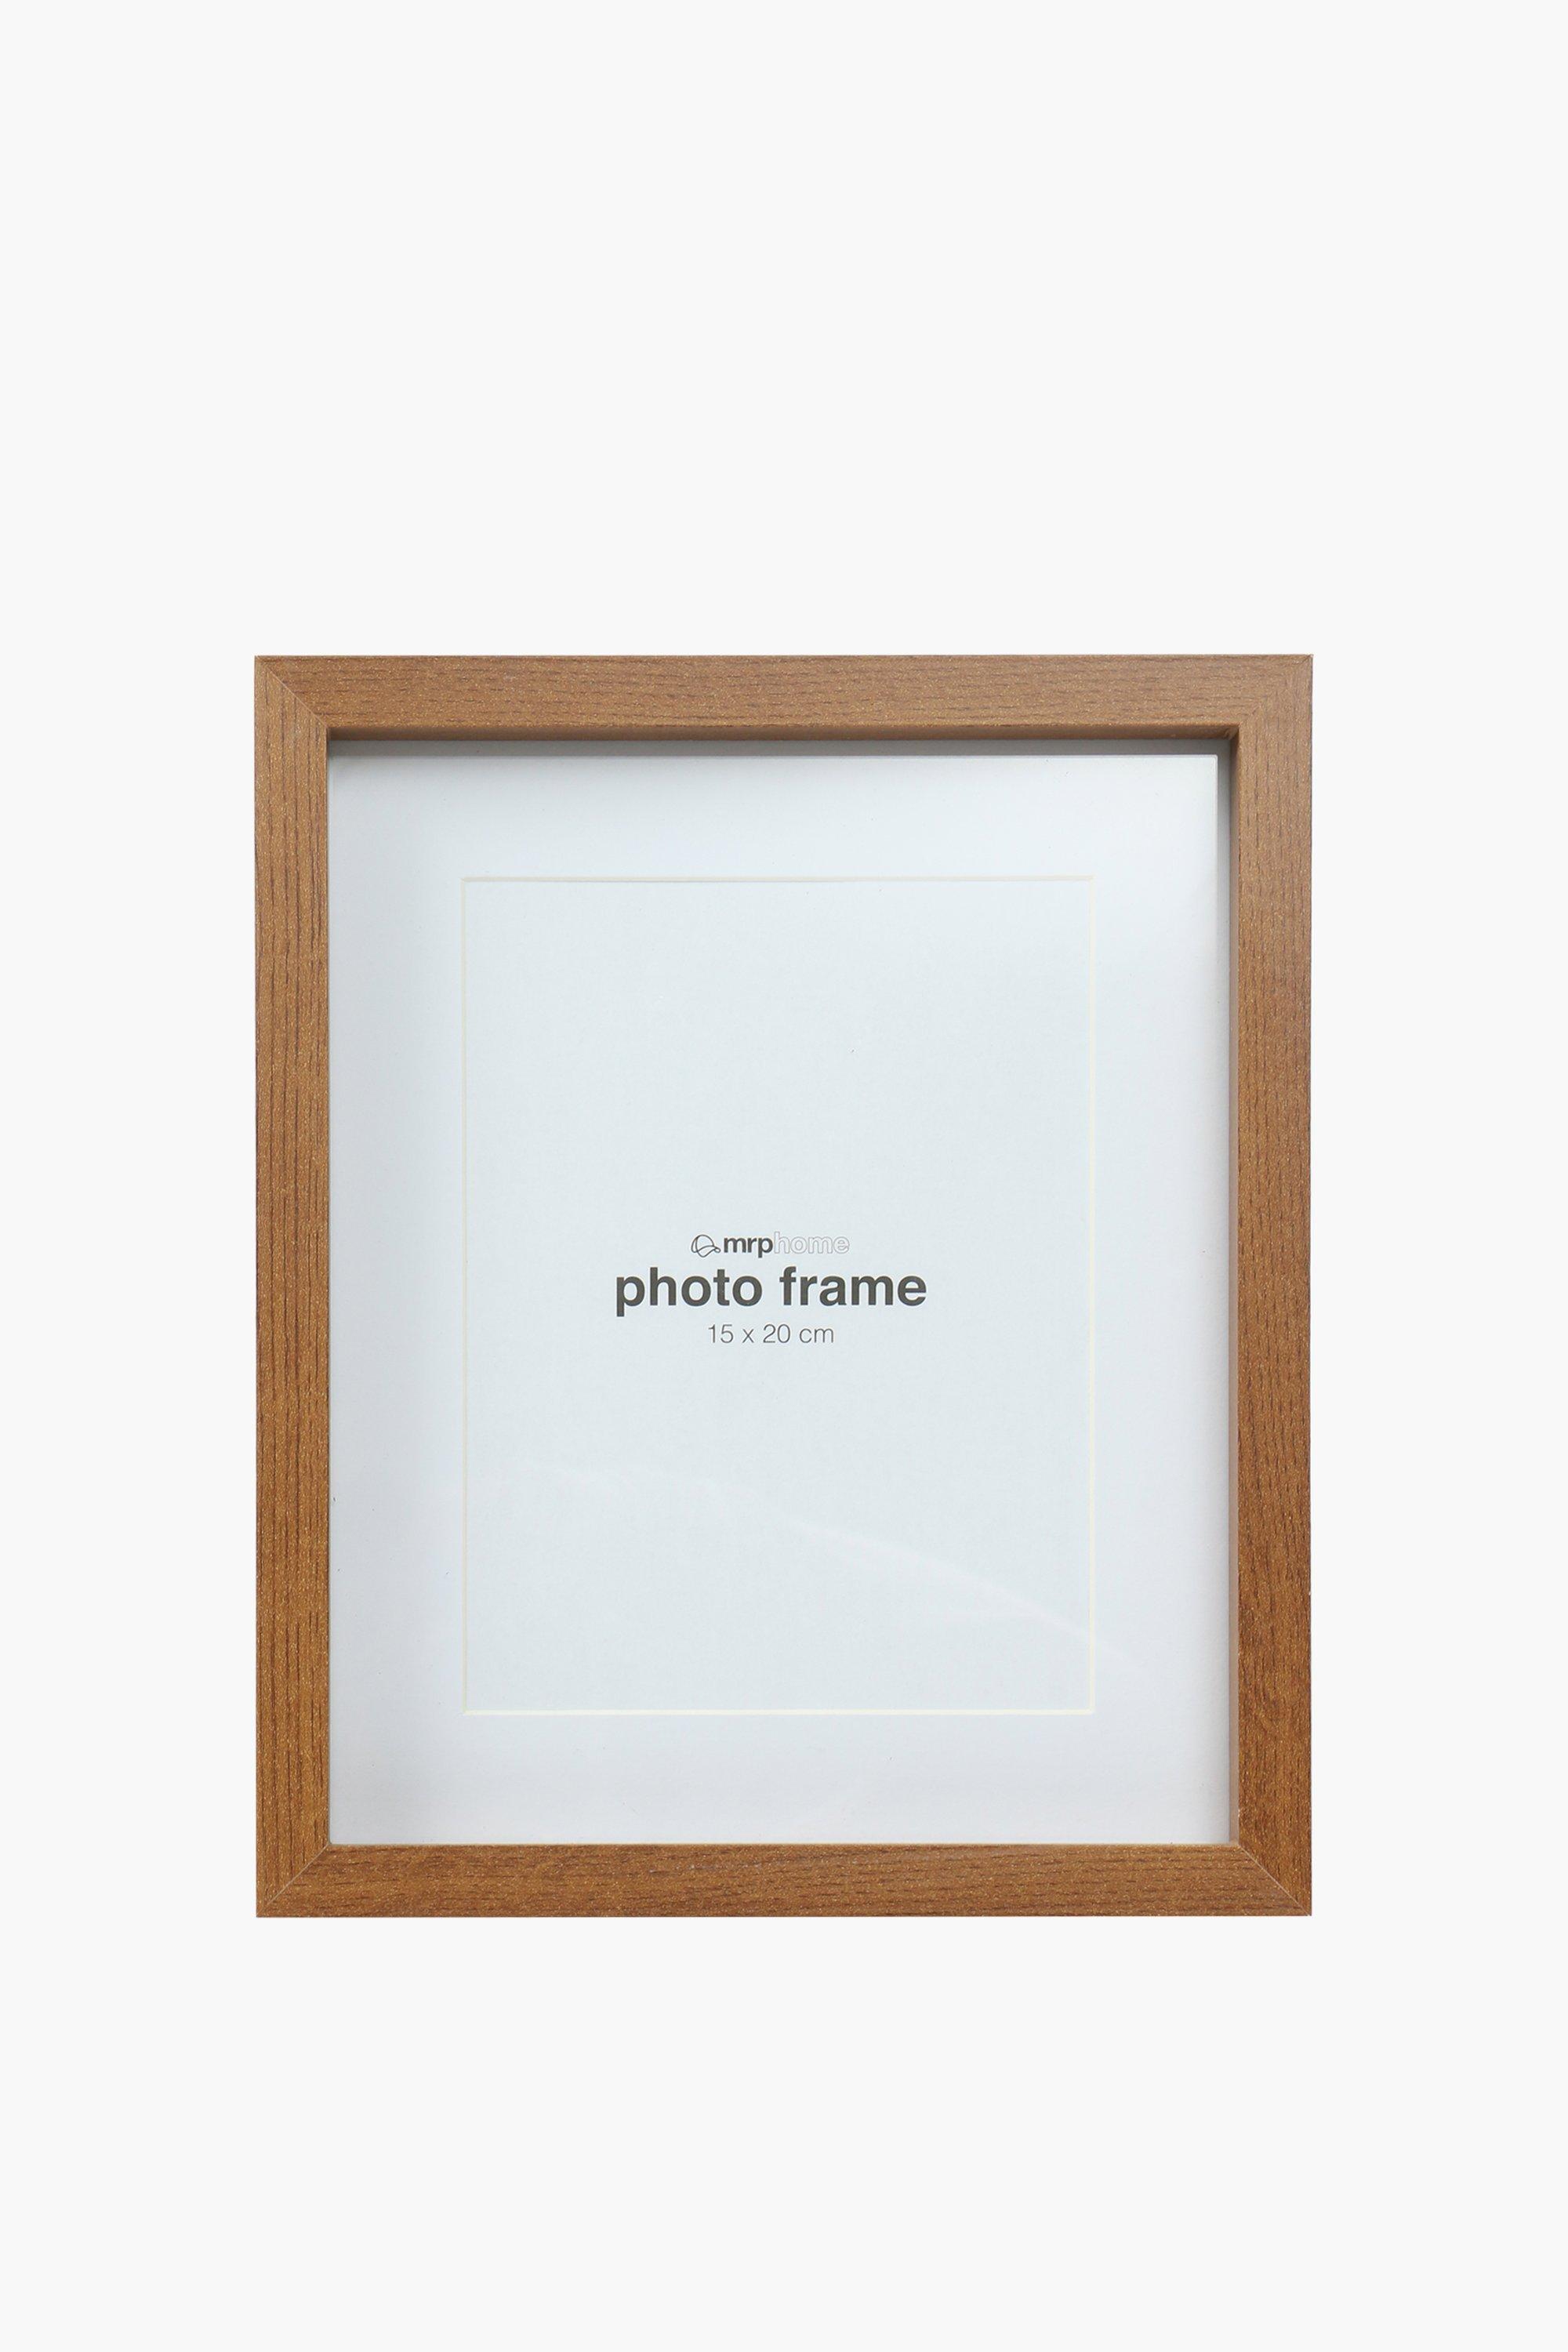 Gallery Double Frame, 15x20cm